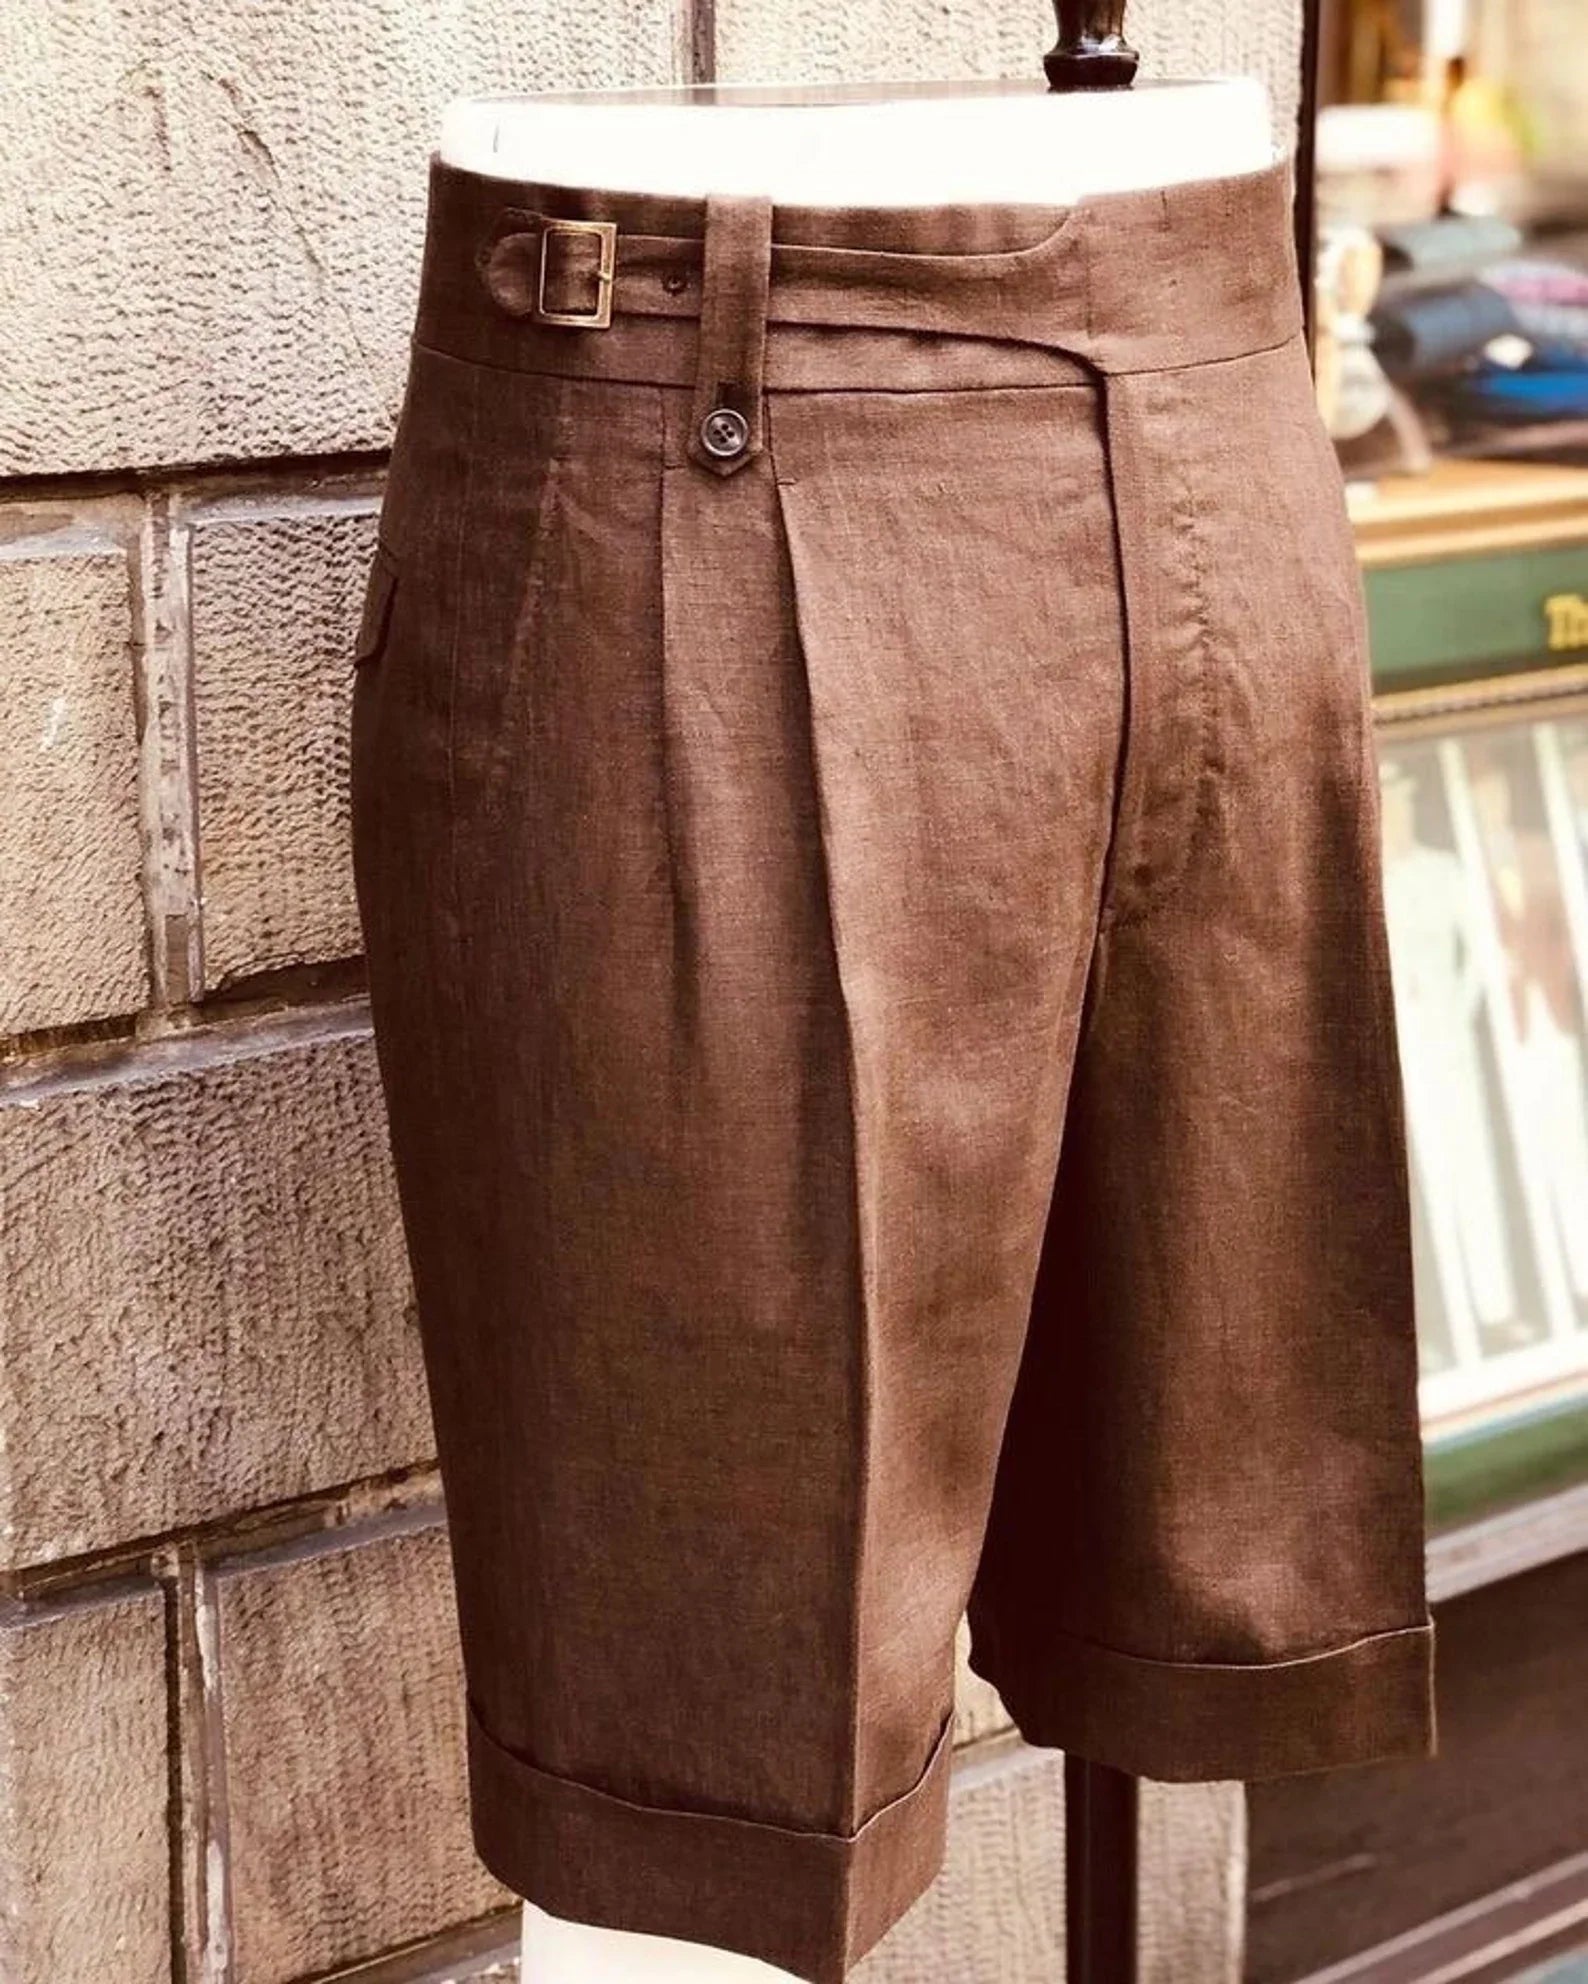 the brown shorts